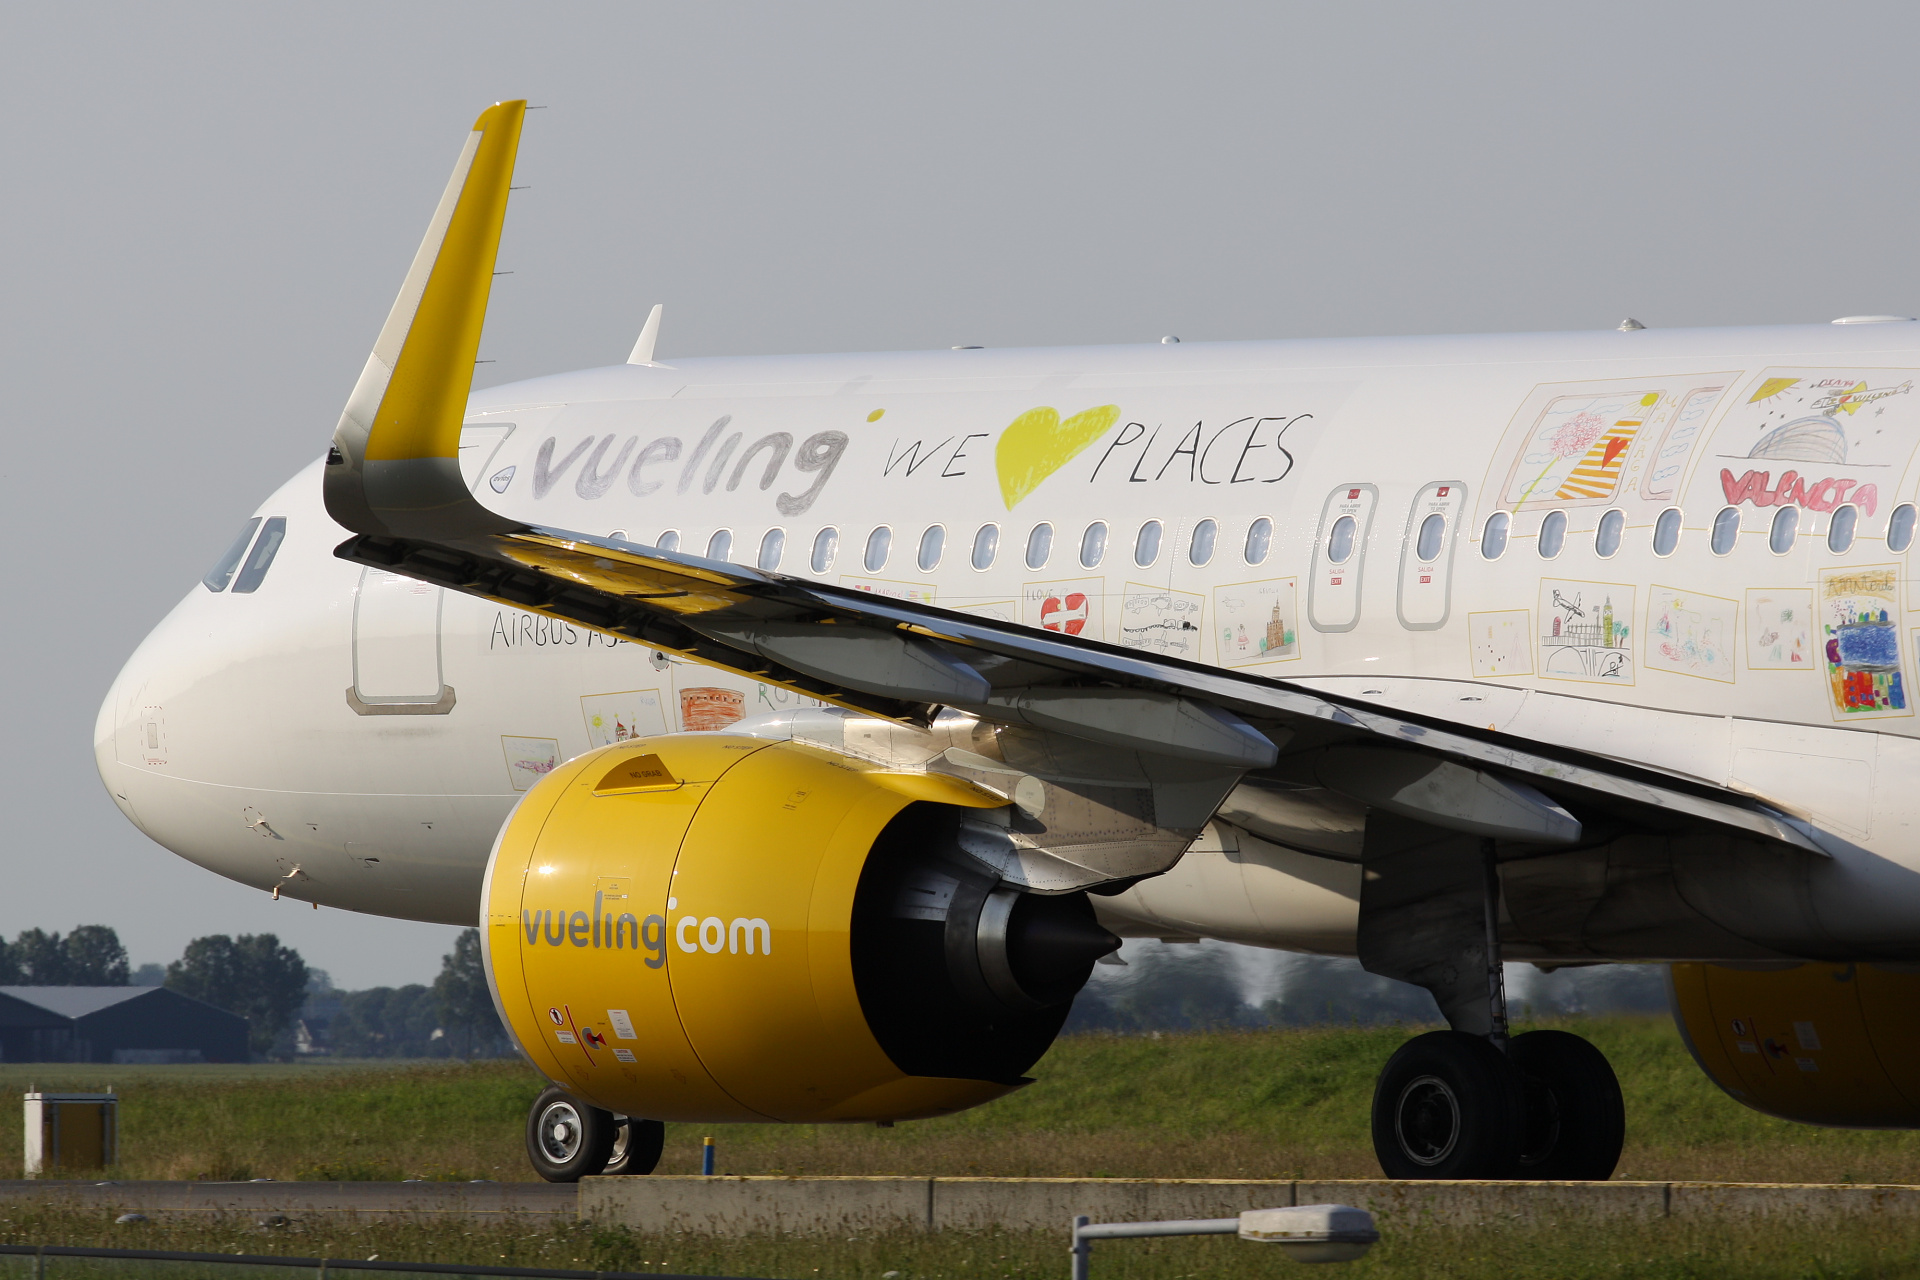 EC-NAJ (We Love Places livery) (Aircraft » Schiphol Spotting » Airbus A320neo » Vueling Airlines)